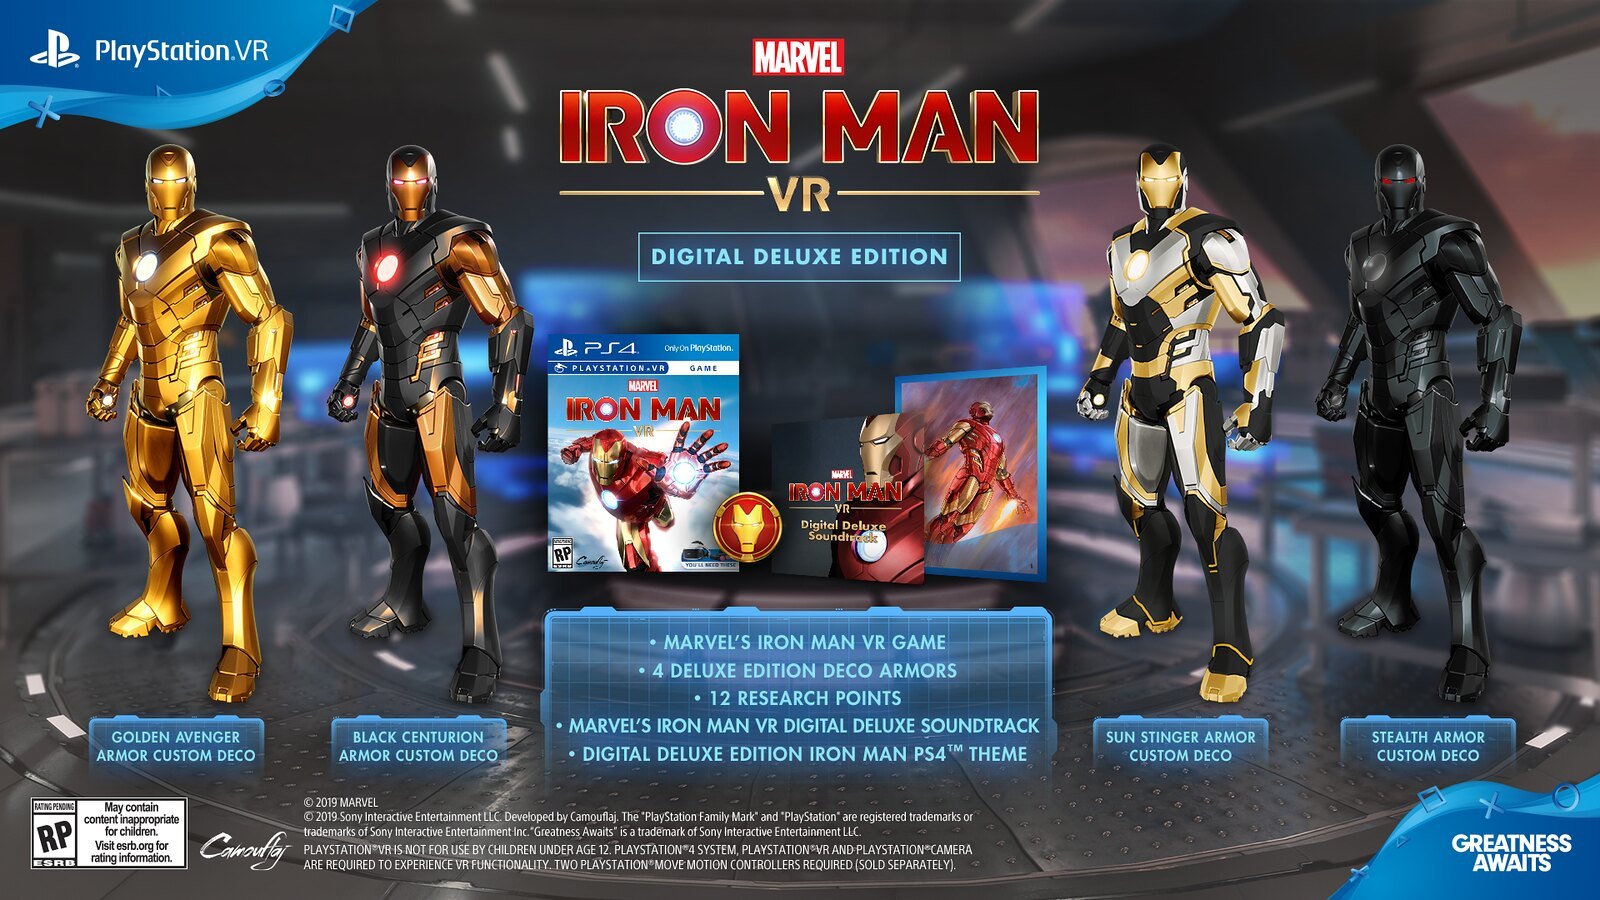 Iron Man VR Last Chance For Pre Order Bonuses, Releases This ...